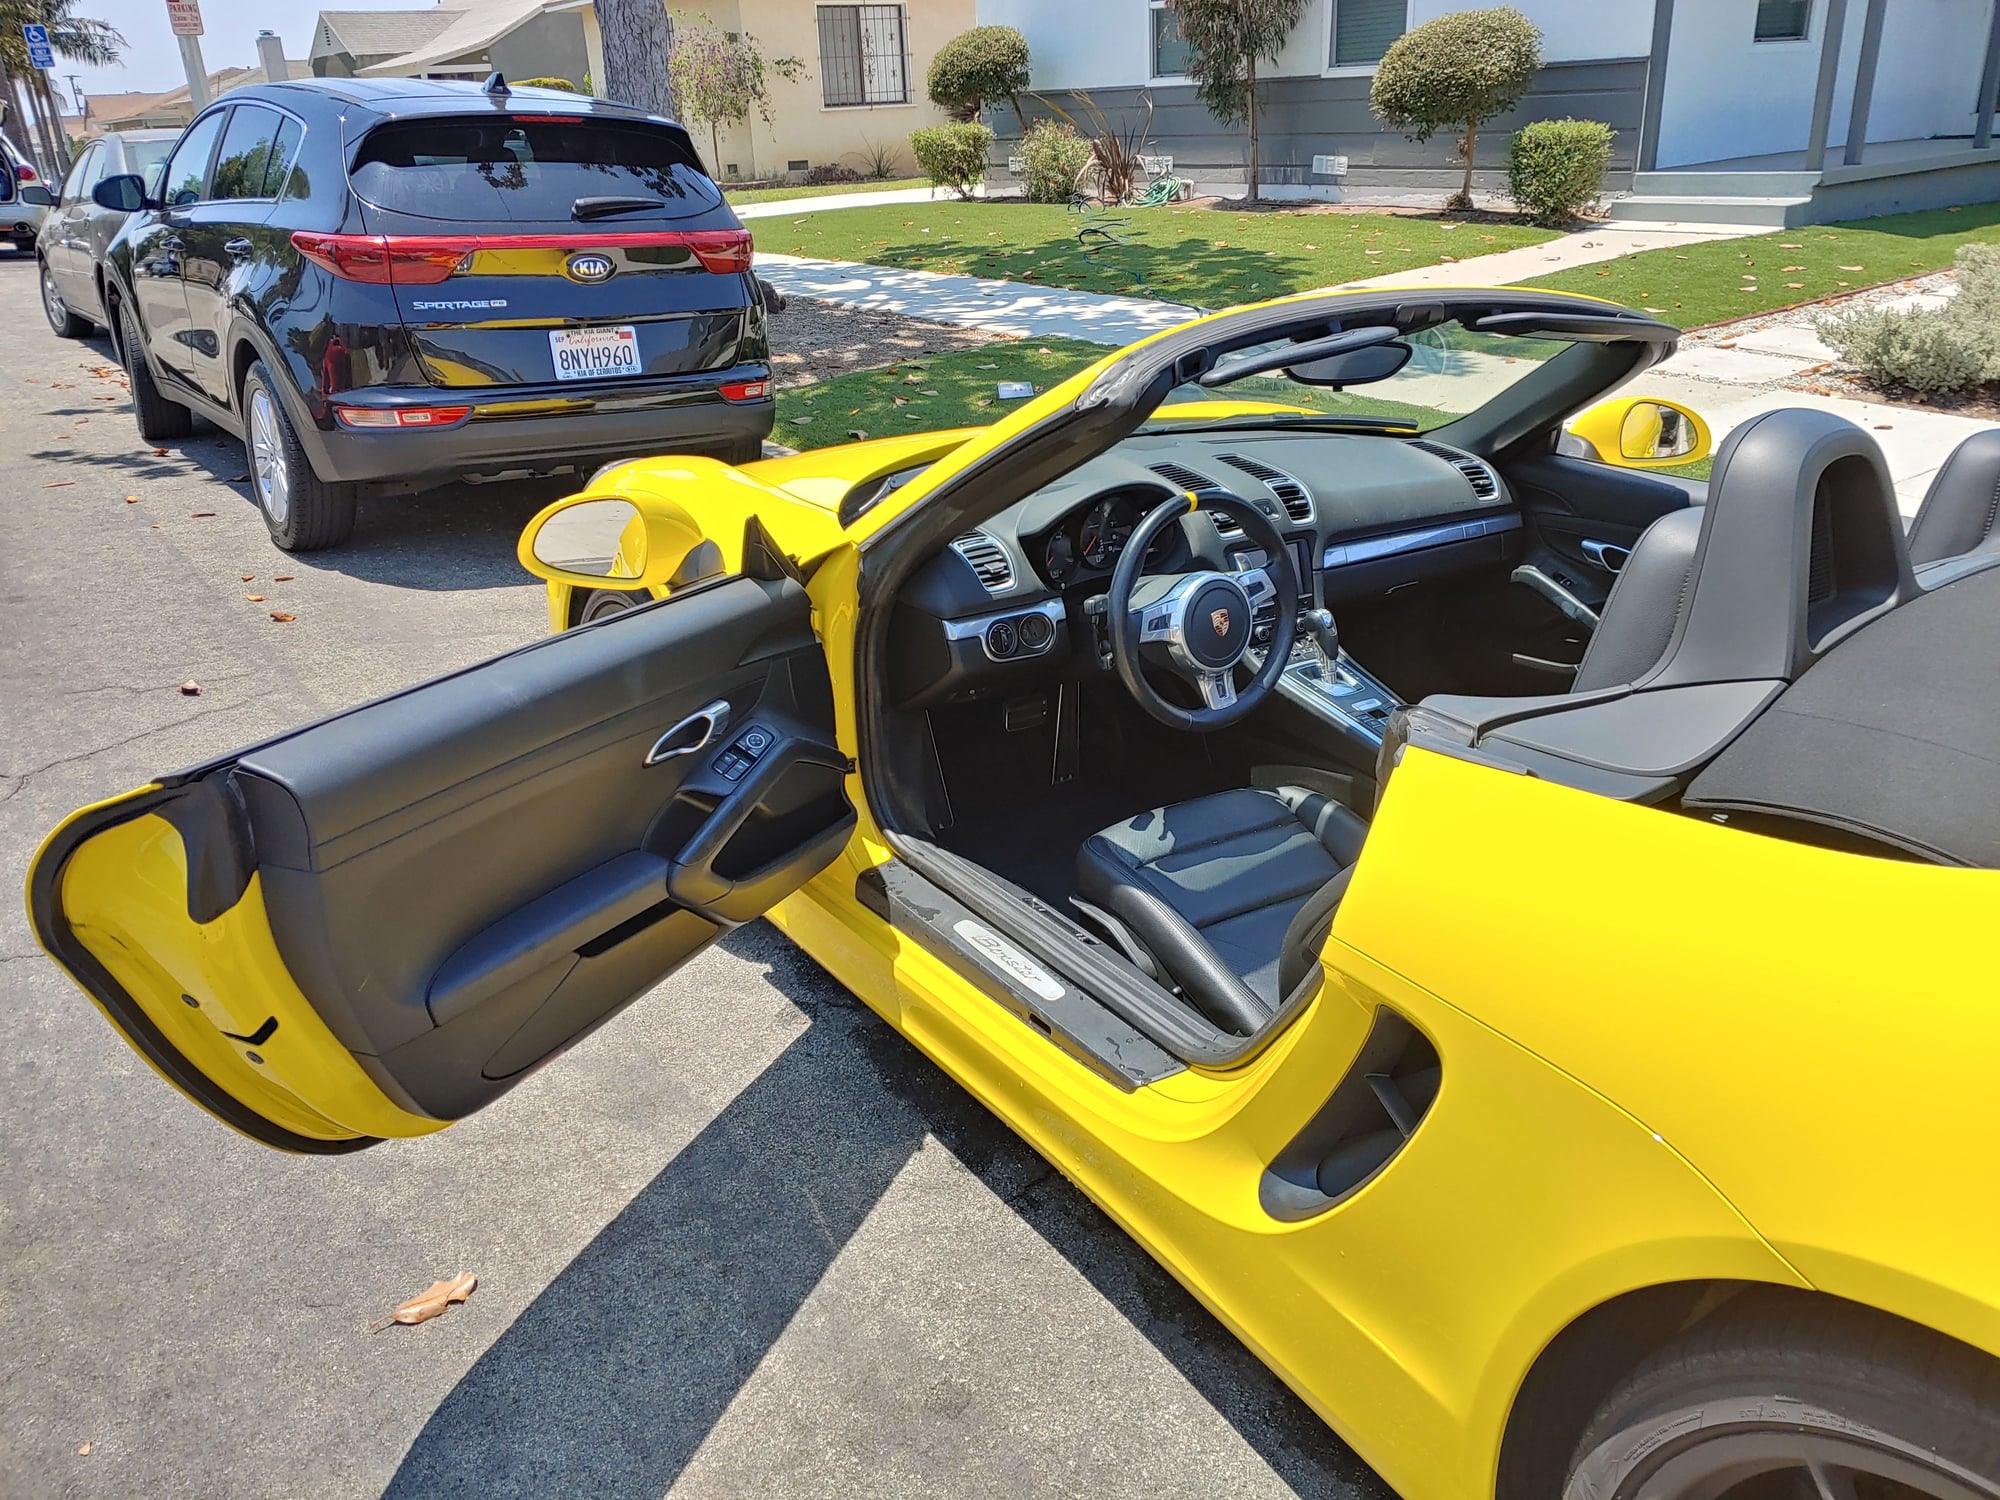 2014 Porsche Boxster - 2014 Porsche Boxster PDK // Racing Yellow // Black Interior // 20" Wheels // BOSE - Used - VIN WP0CA2A83ES120168 - 59,000 Miles - 6 cyl - 2WD - Automatic - Convertible - Yellow - Los Angeles, CA 90047, United States